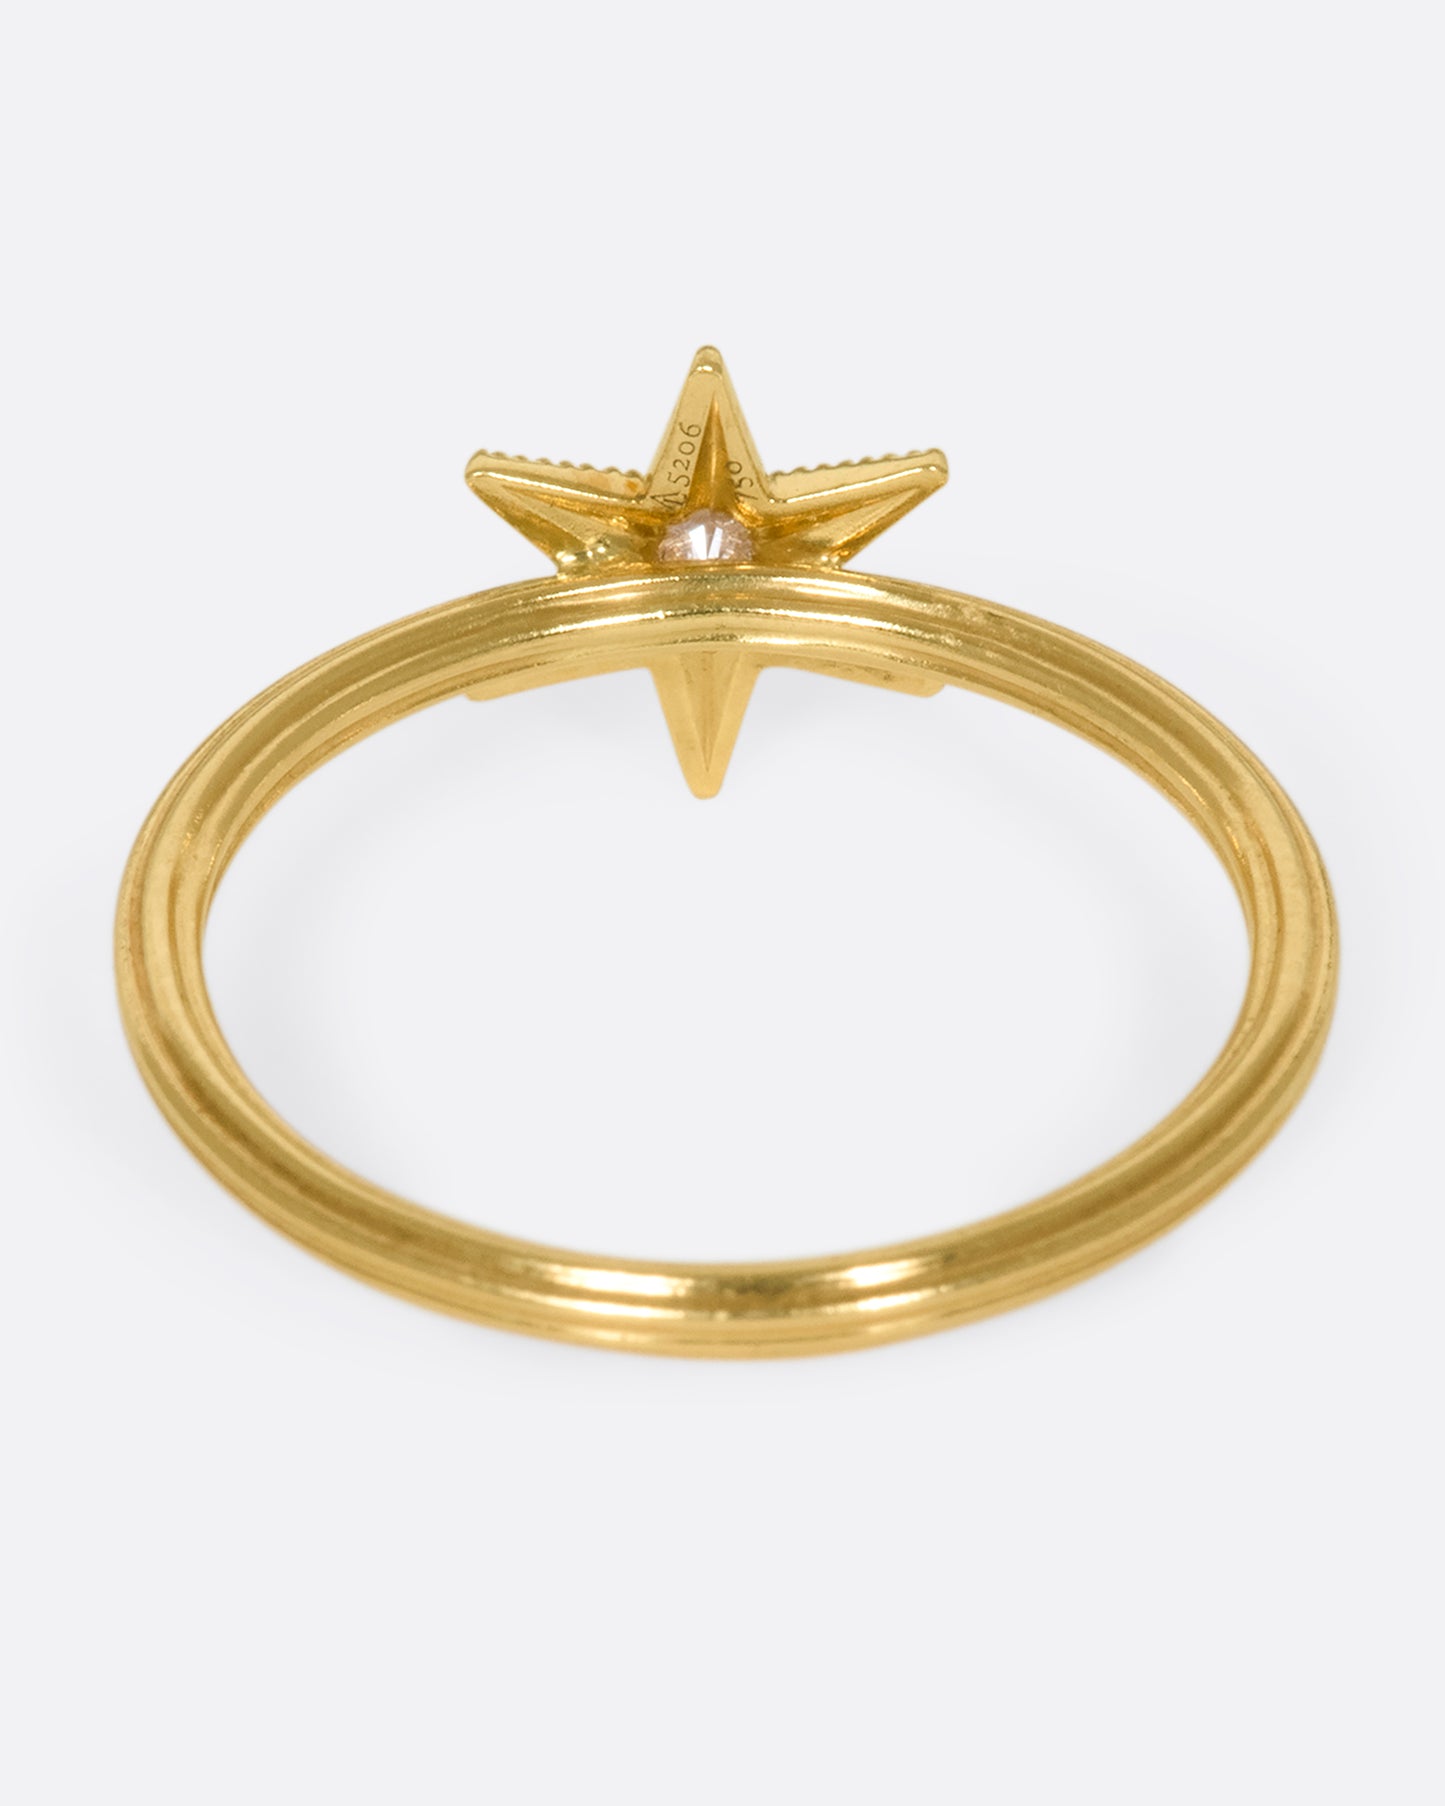 An 18k gold six-point star ring with a round diamond nestled in the center